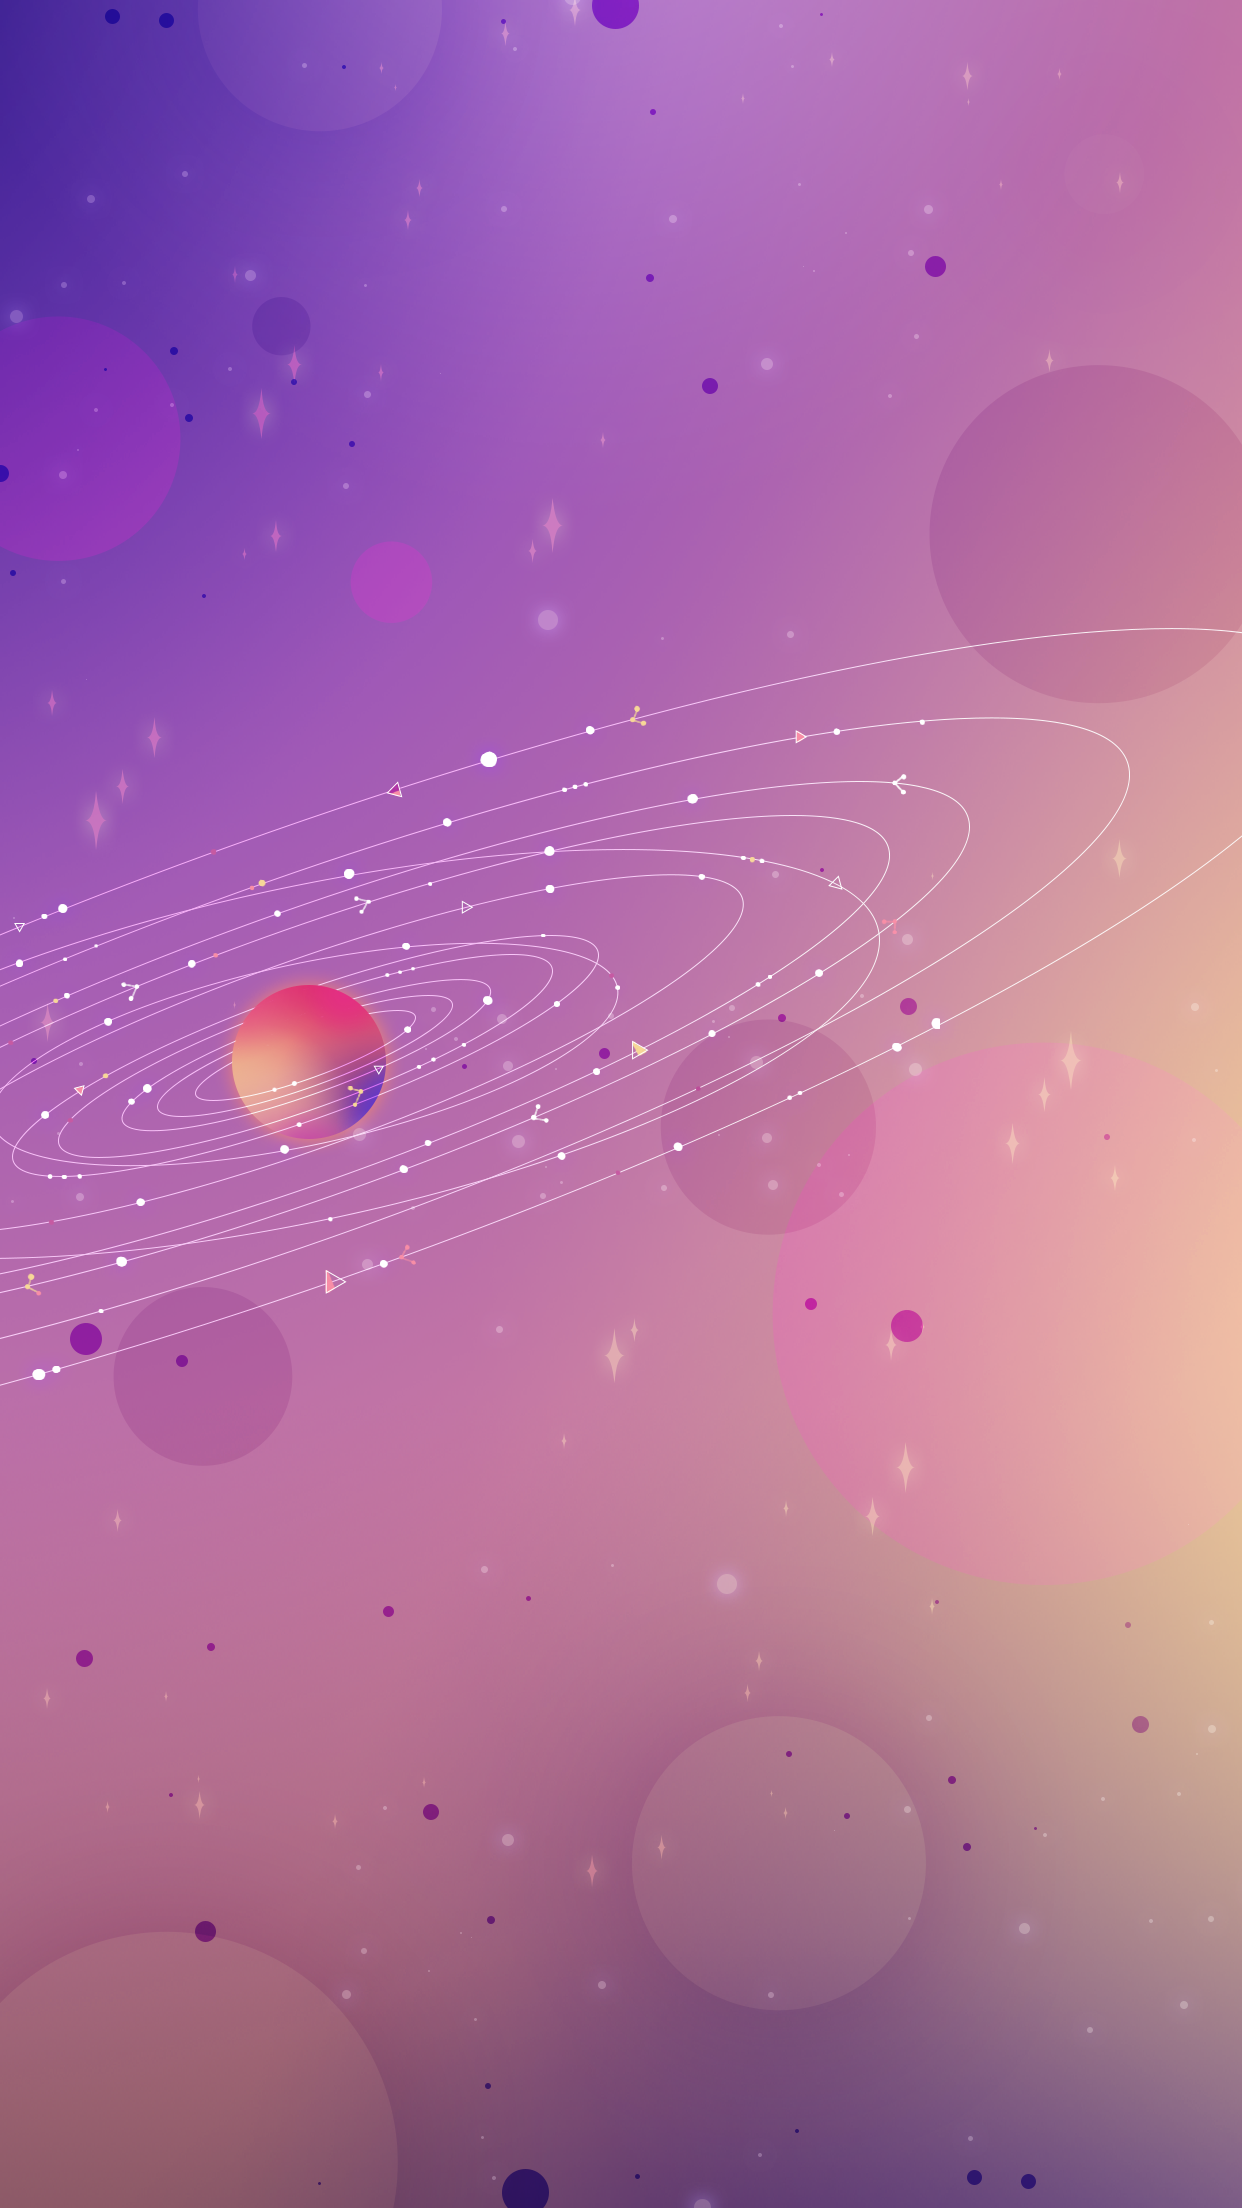 Gaia Downloads: Wallpaper and Goodies